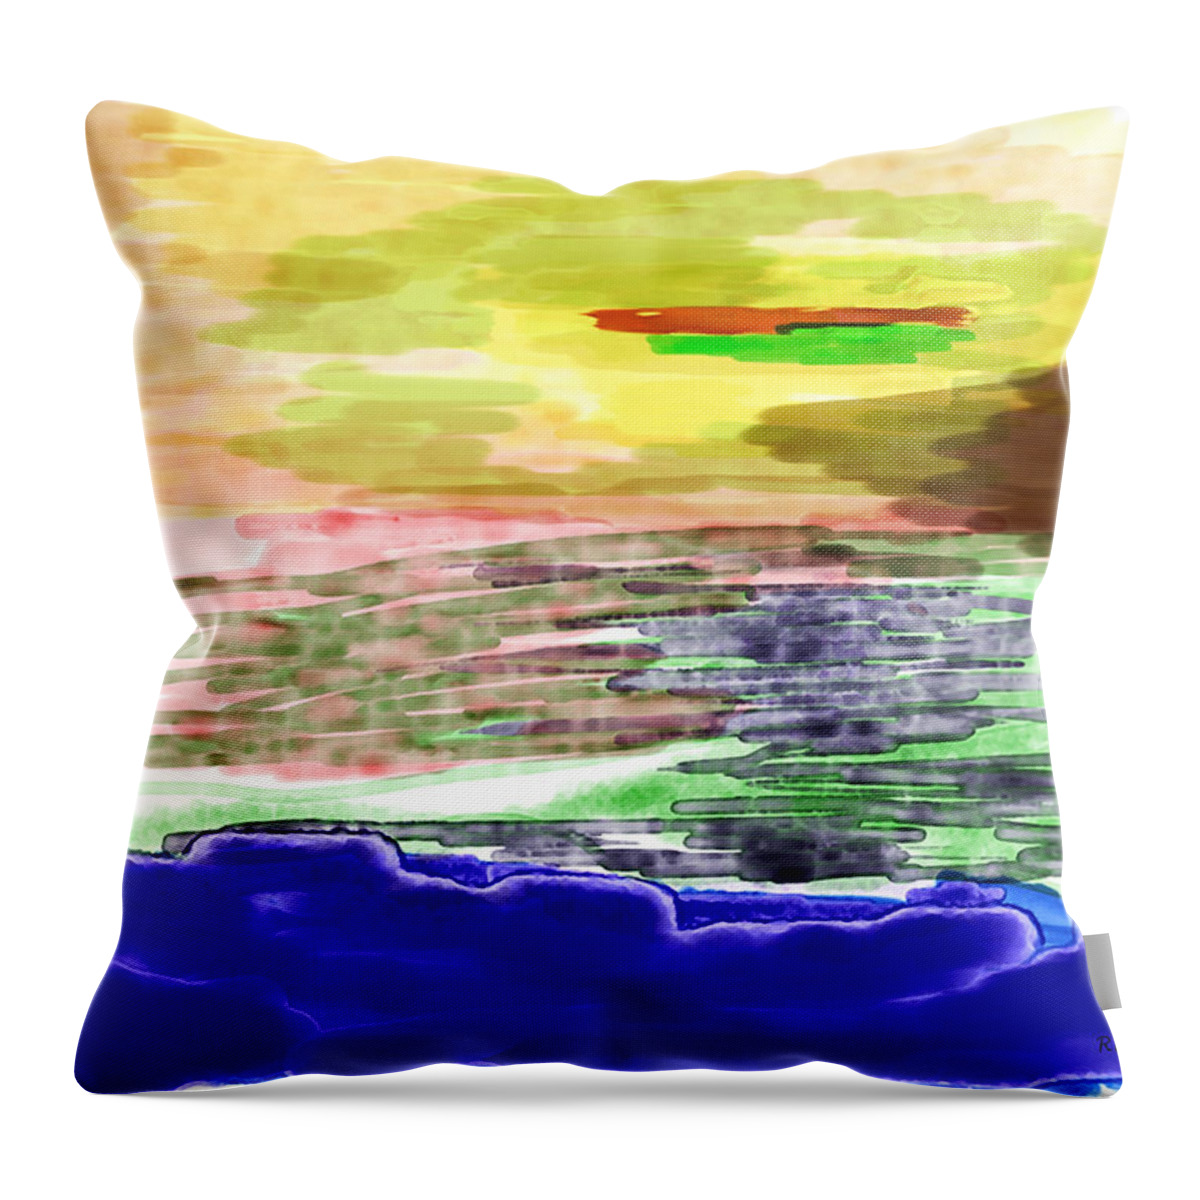 Digital Throw Pillow featuring the painting Looking Outward From The Blue by Richard Baron